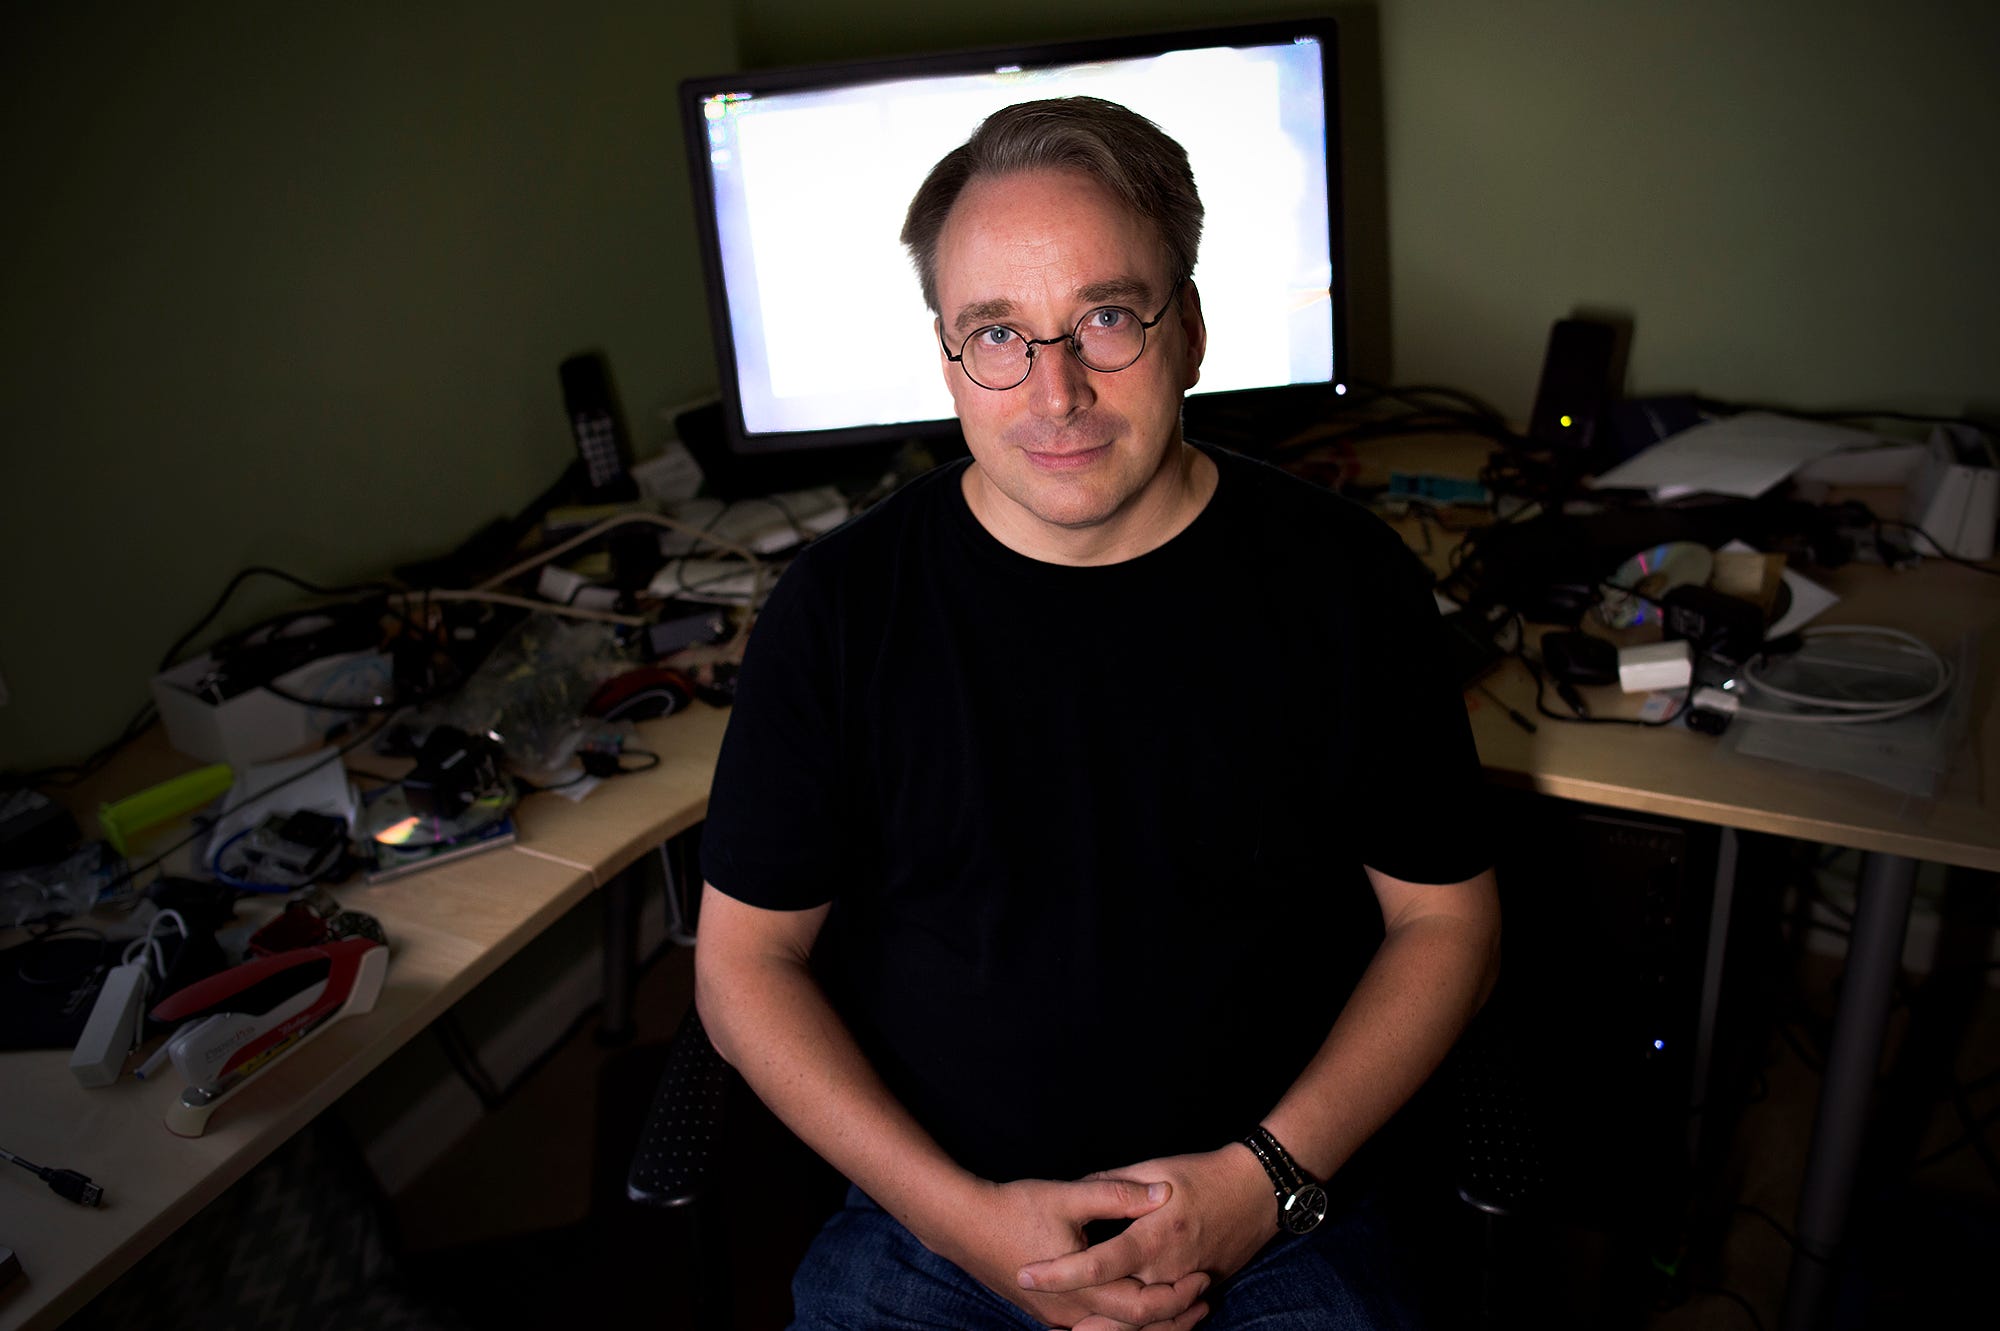 Linus Torvalds wearing a black T shirt sitting in his office in front of a computer screen